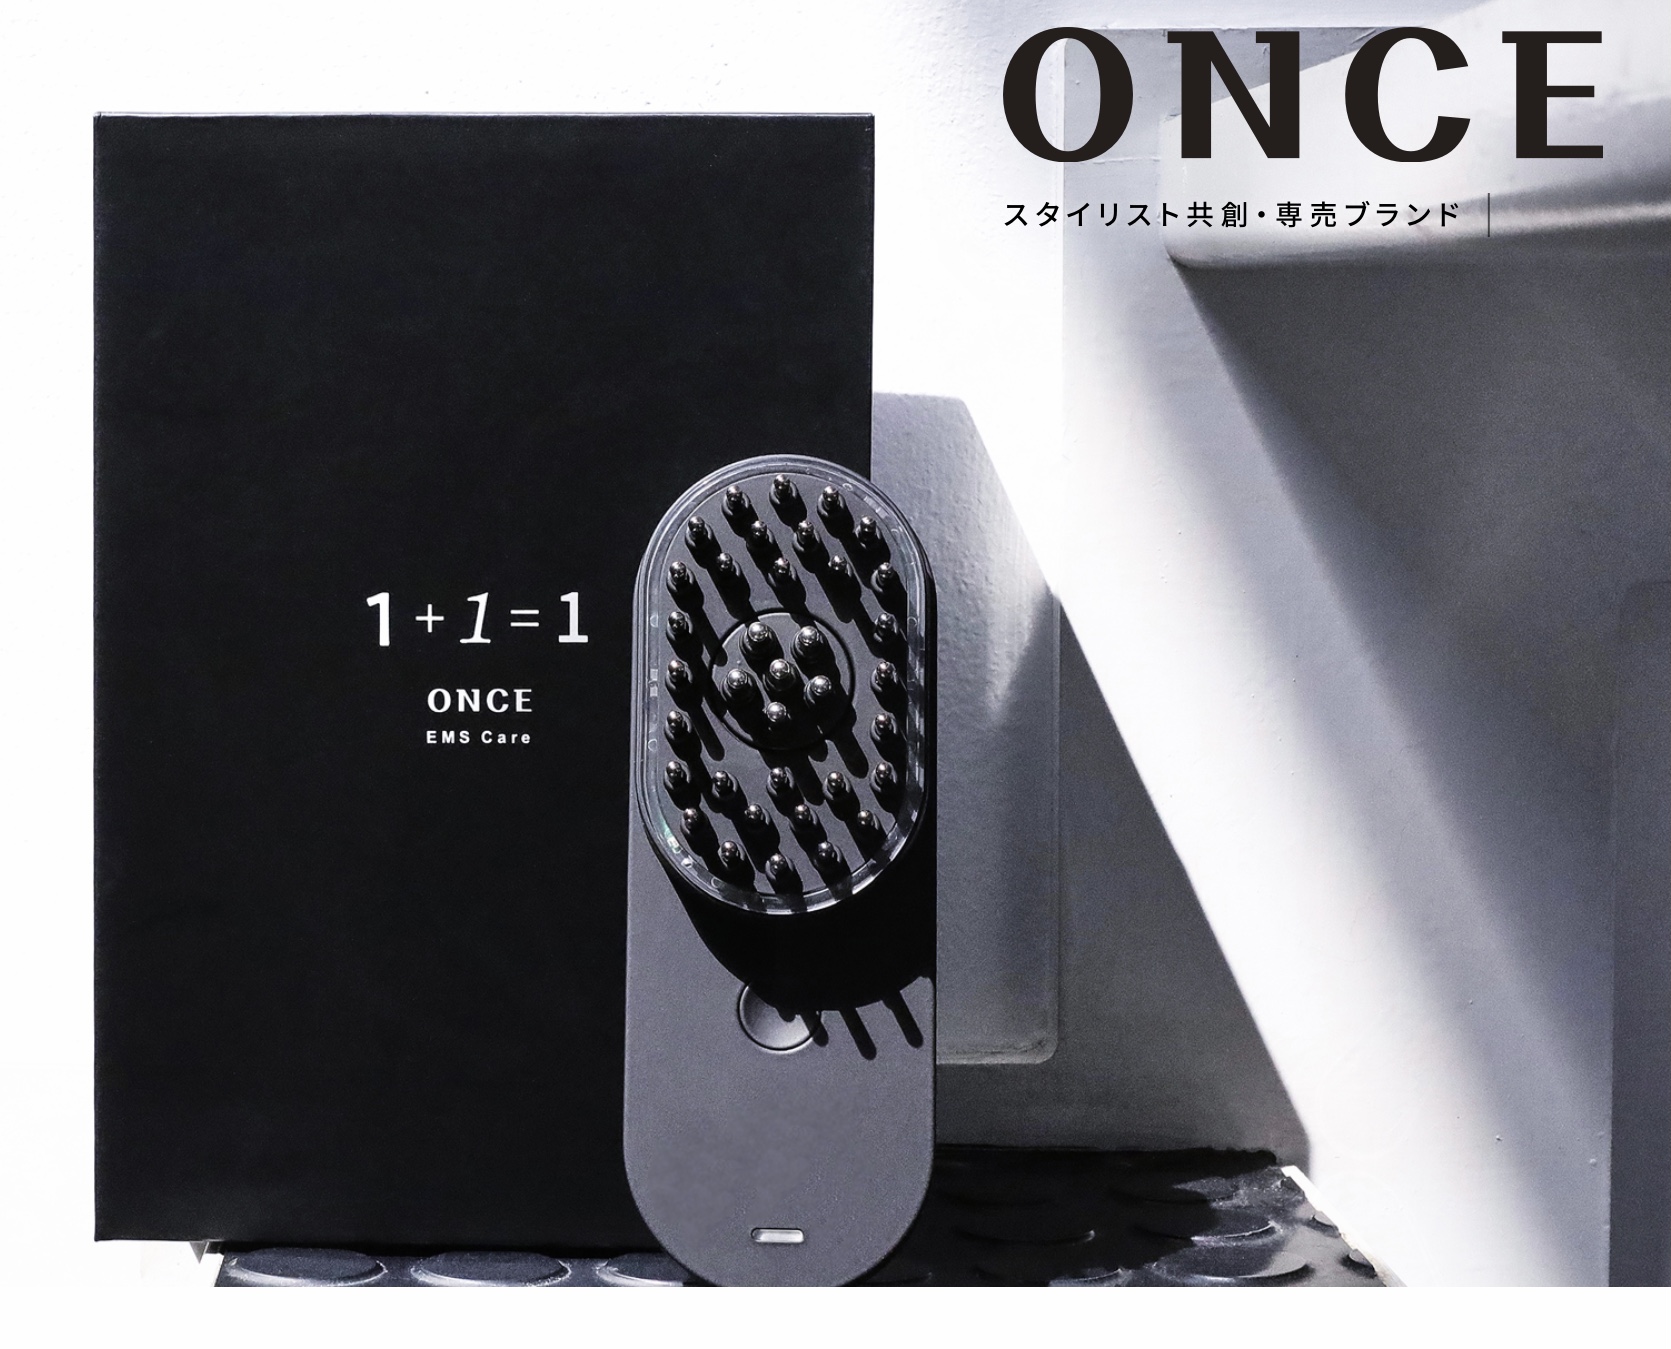 ONCE EMS Care 電気バリブラシ